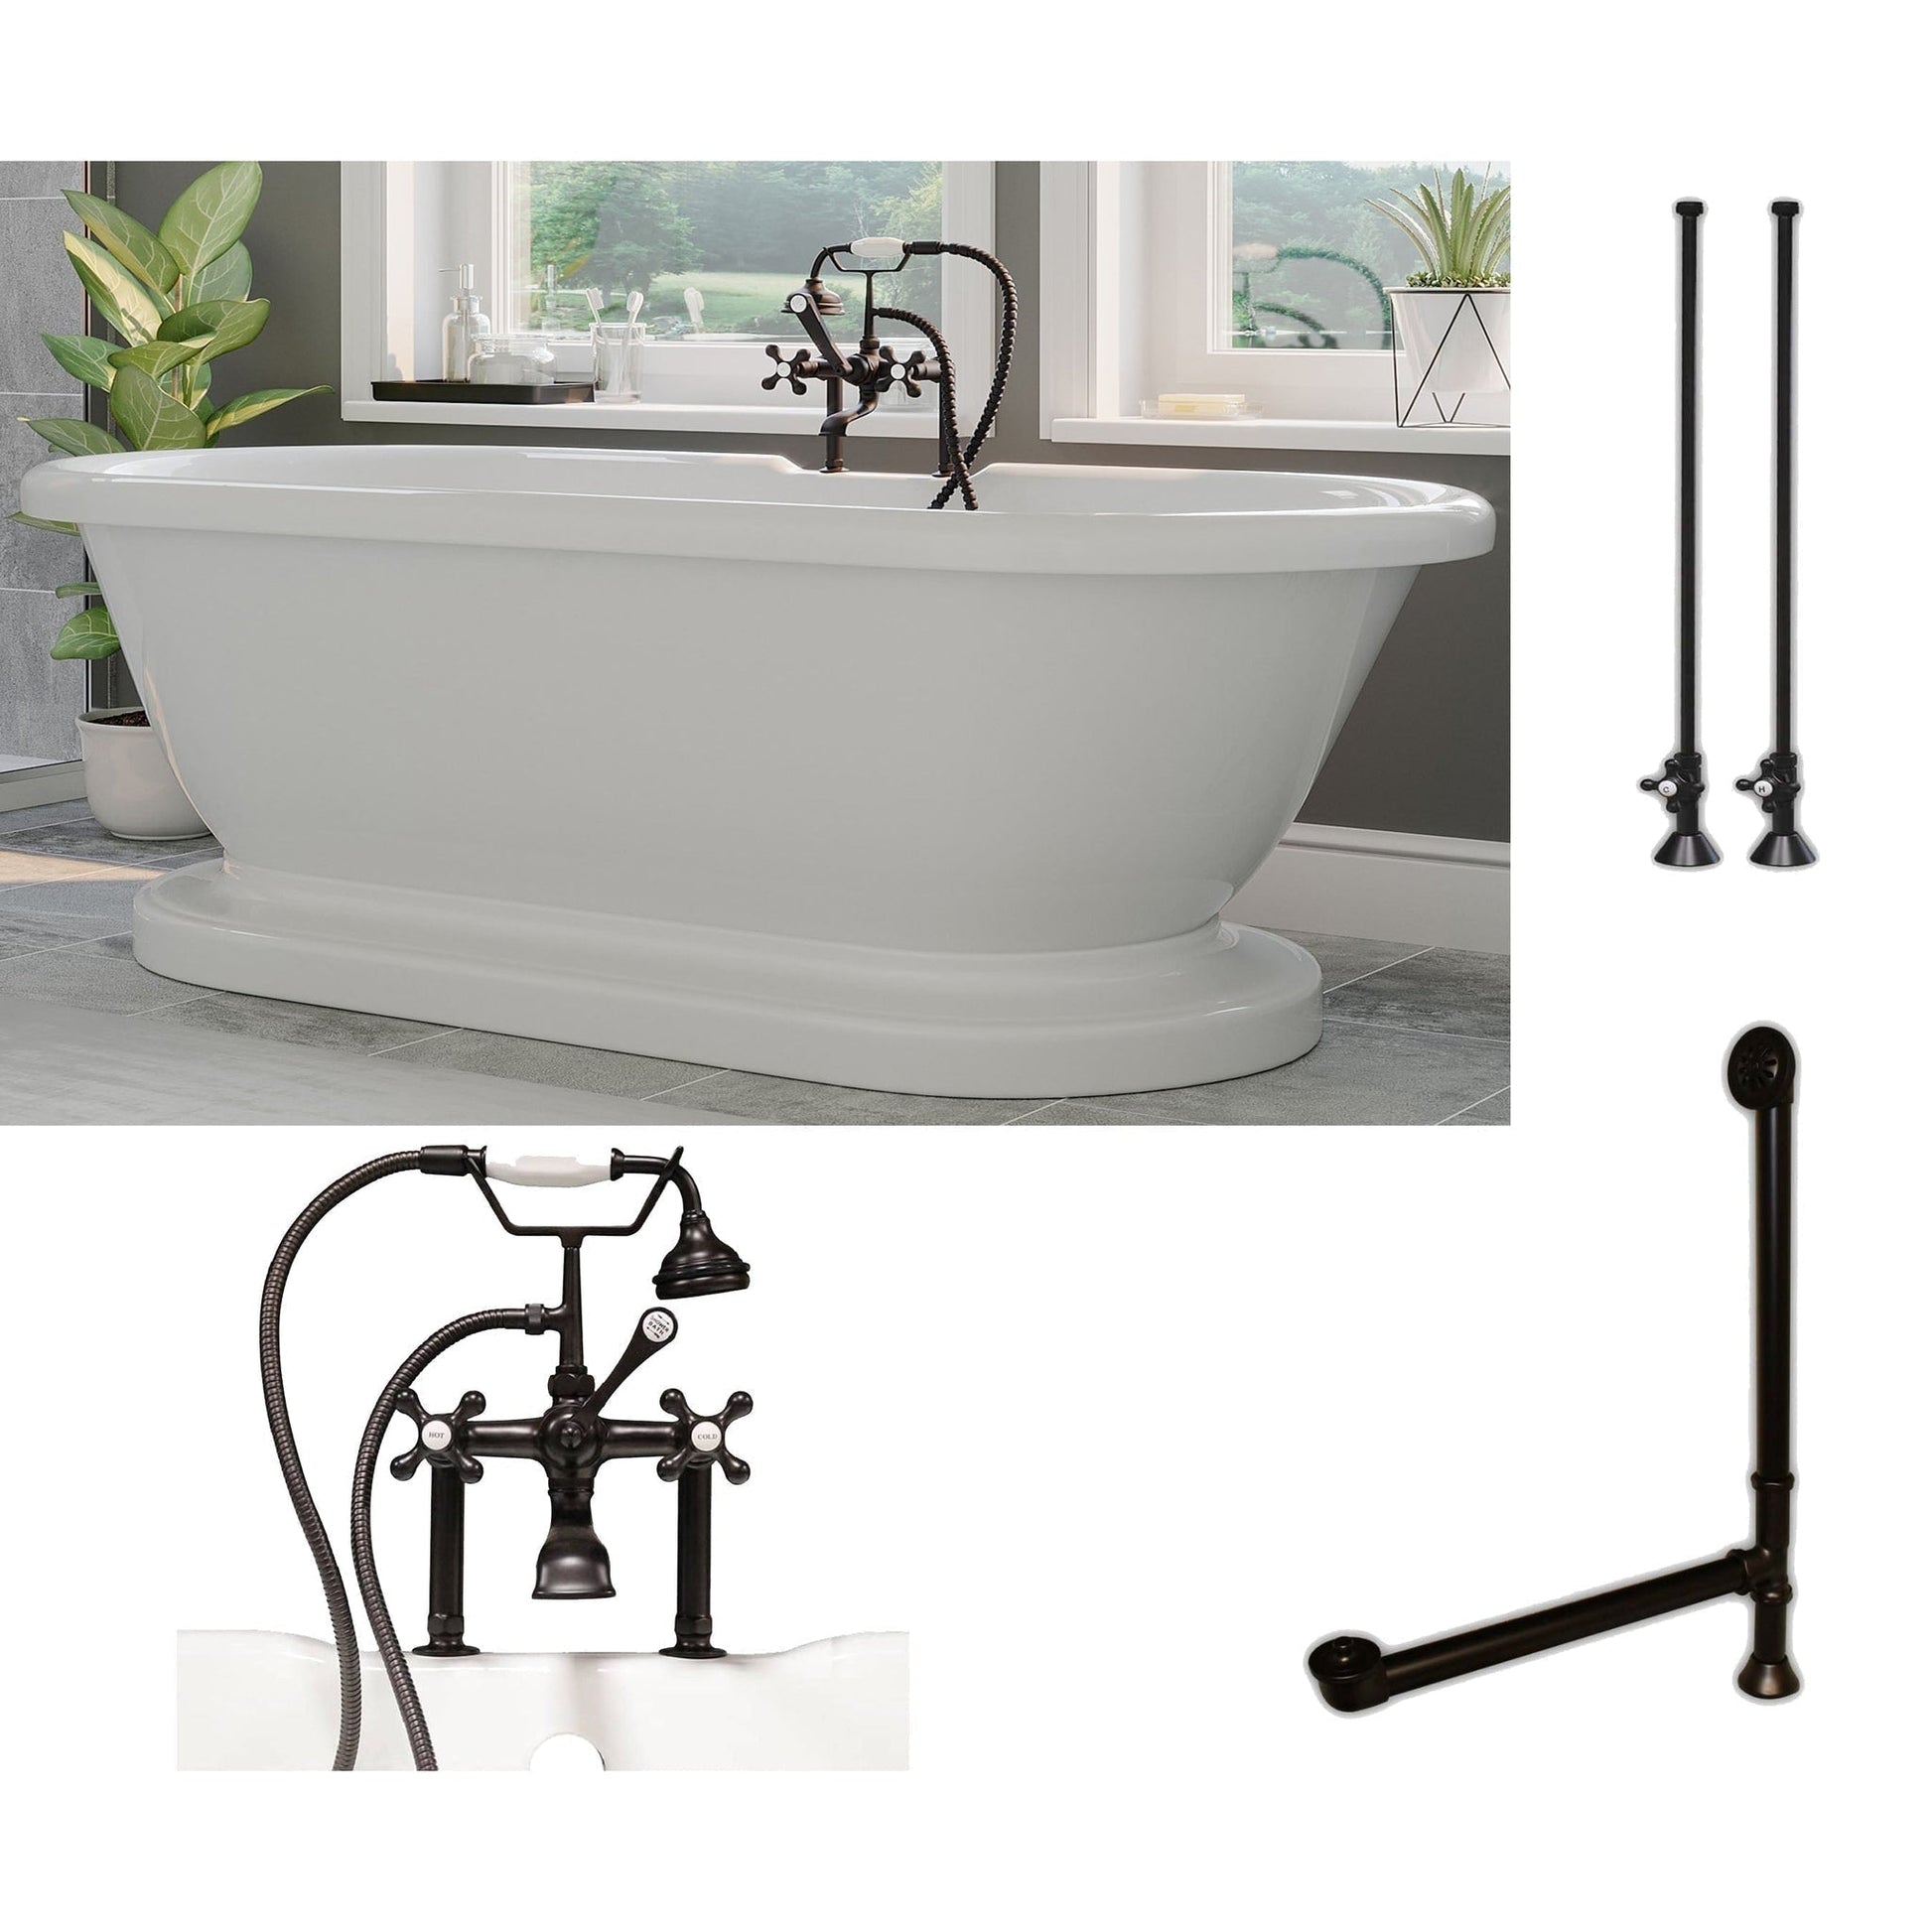 Cambridge Plumbing 60" White Acrylic Double Ended Pedestal Bathtub With Deck Holes And Complete Plumbing Package Including 6” Riser Deck Mount Faucet, Supply Lines, Drain And Overflow Assembly In Oil Rubbed Bronze